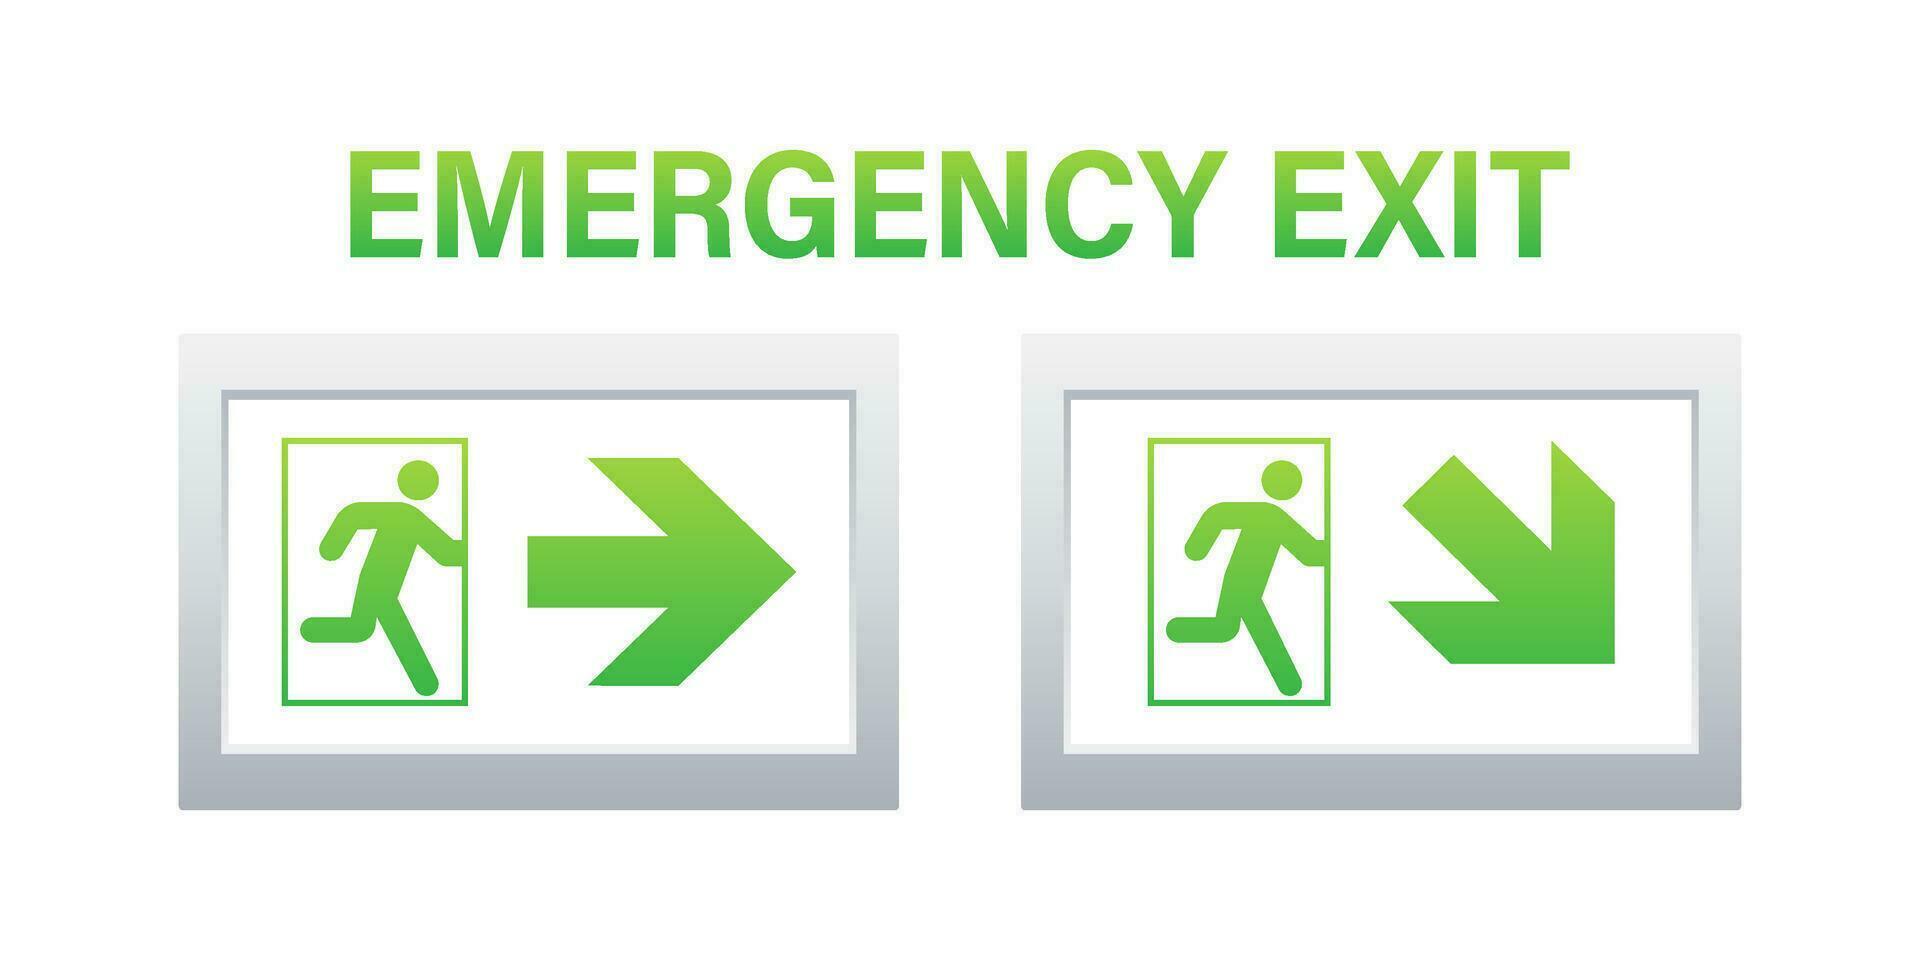 Emergency exit sign. Protection symbol. Fire icon. Vector stock illustration